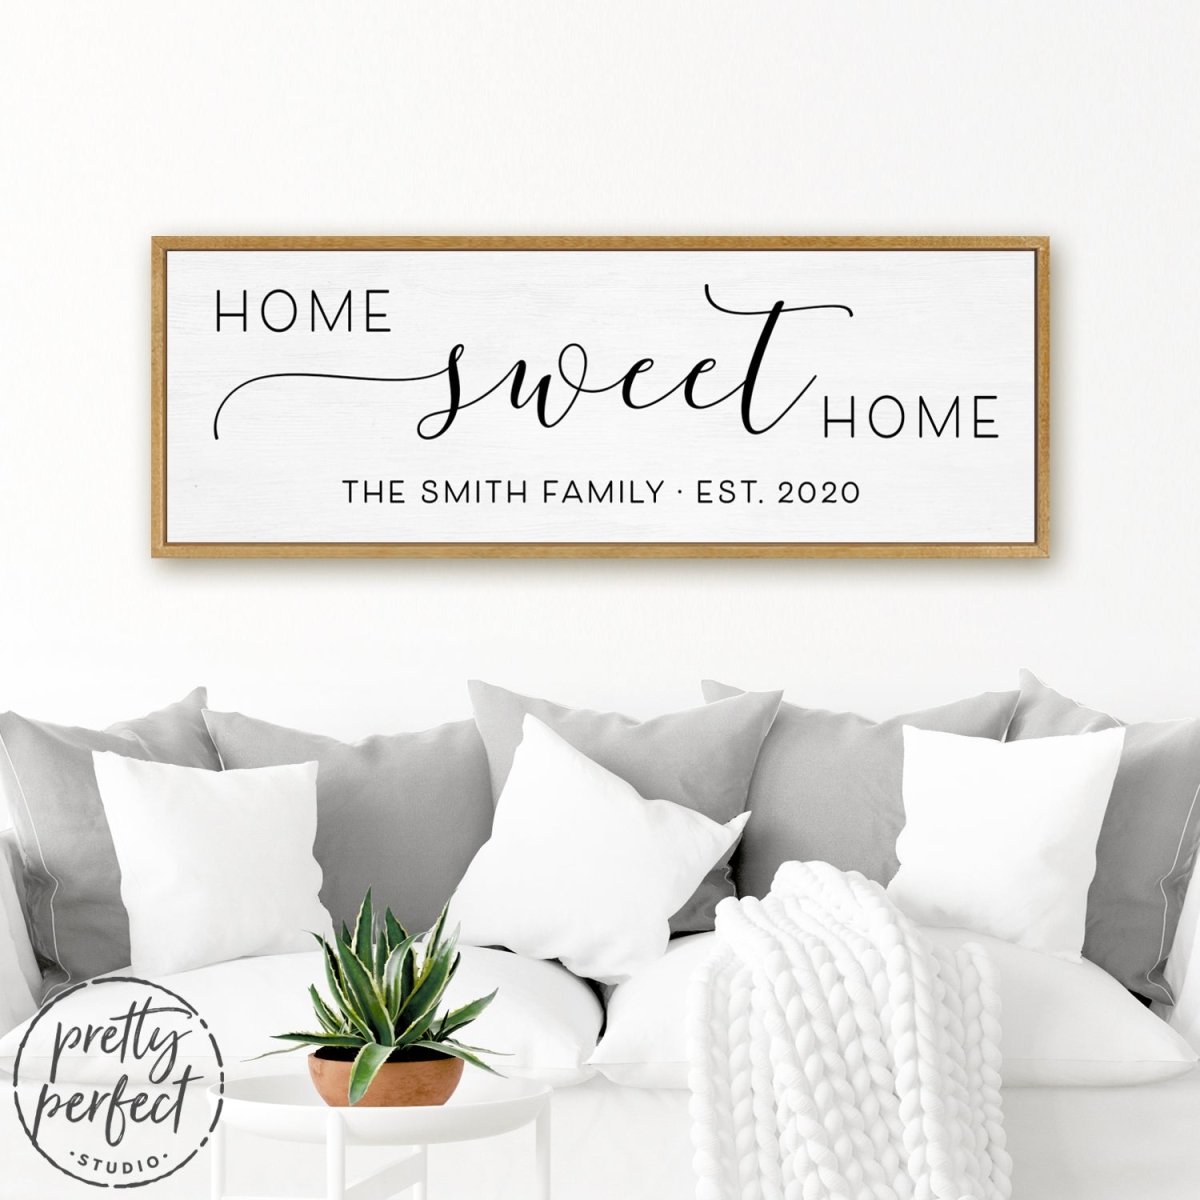 Personalized Home Sweet Home Sign Hanging on Wall Above Couch - Pretty Perfect Studio